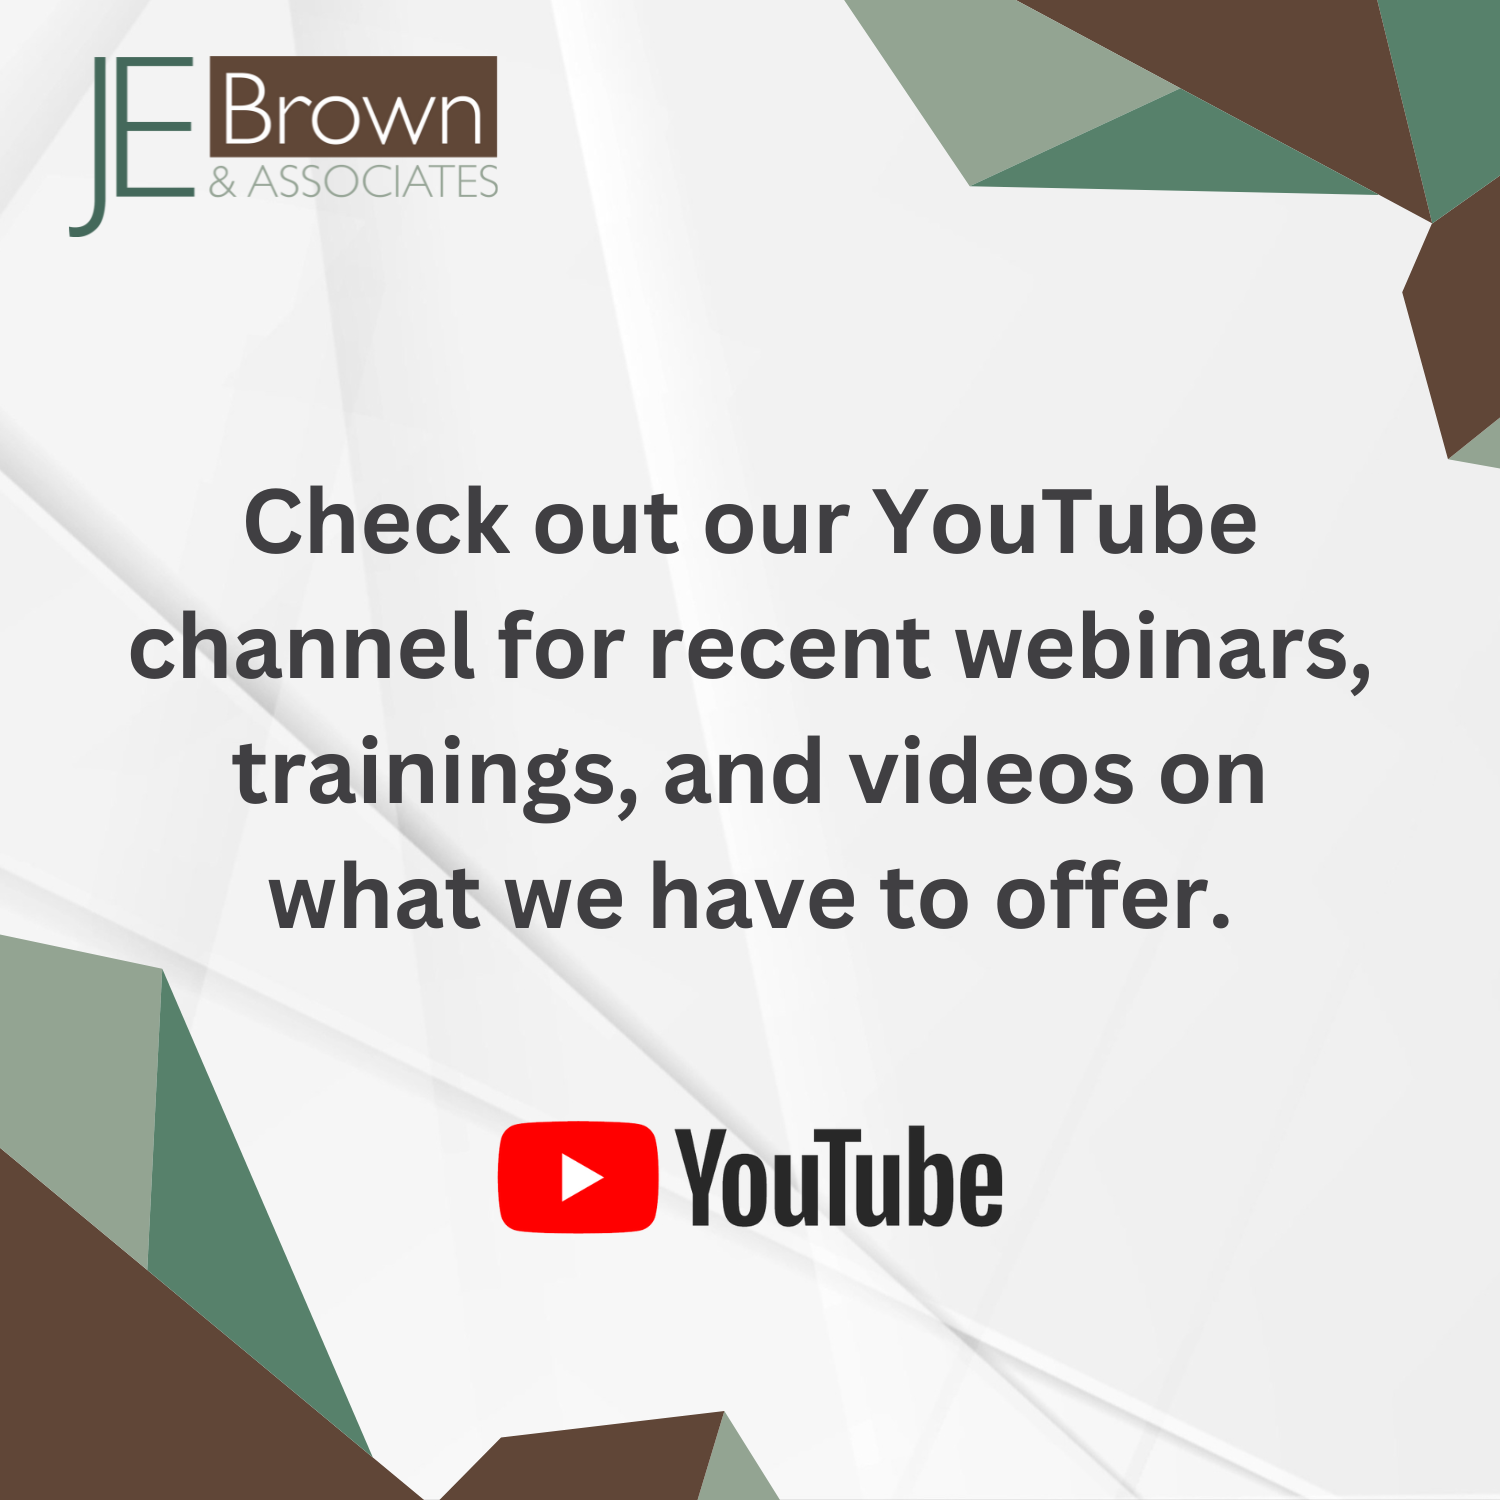 Check out our YouTube channel for what we have to offer.